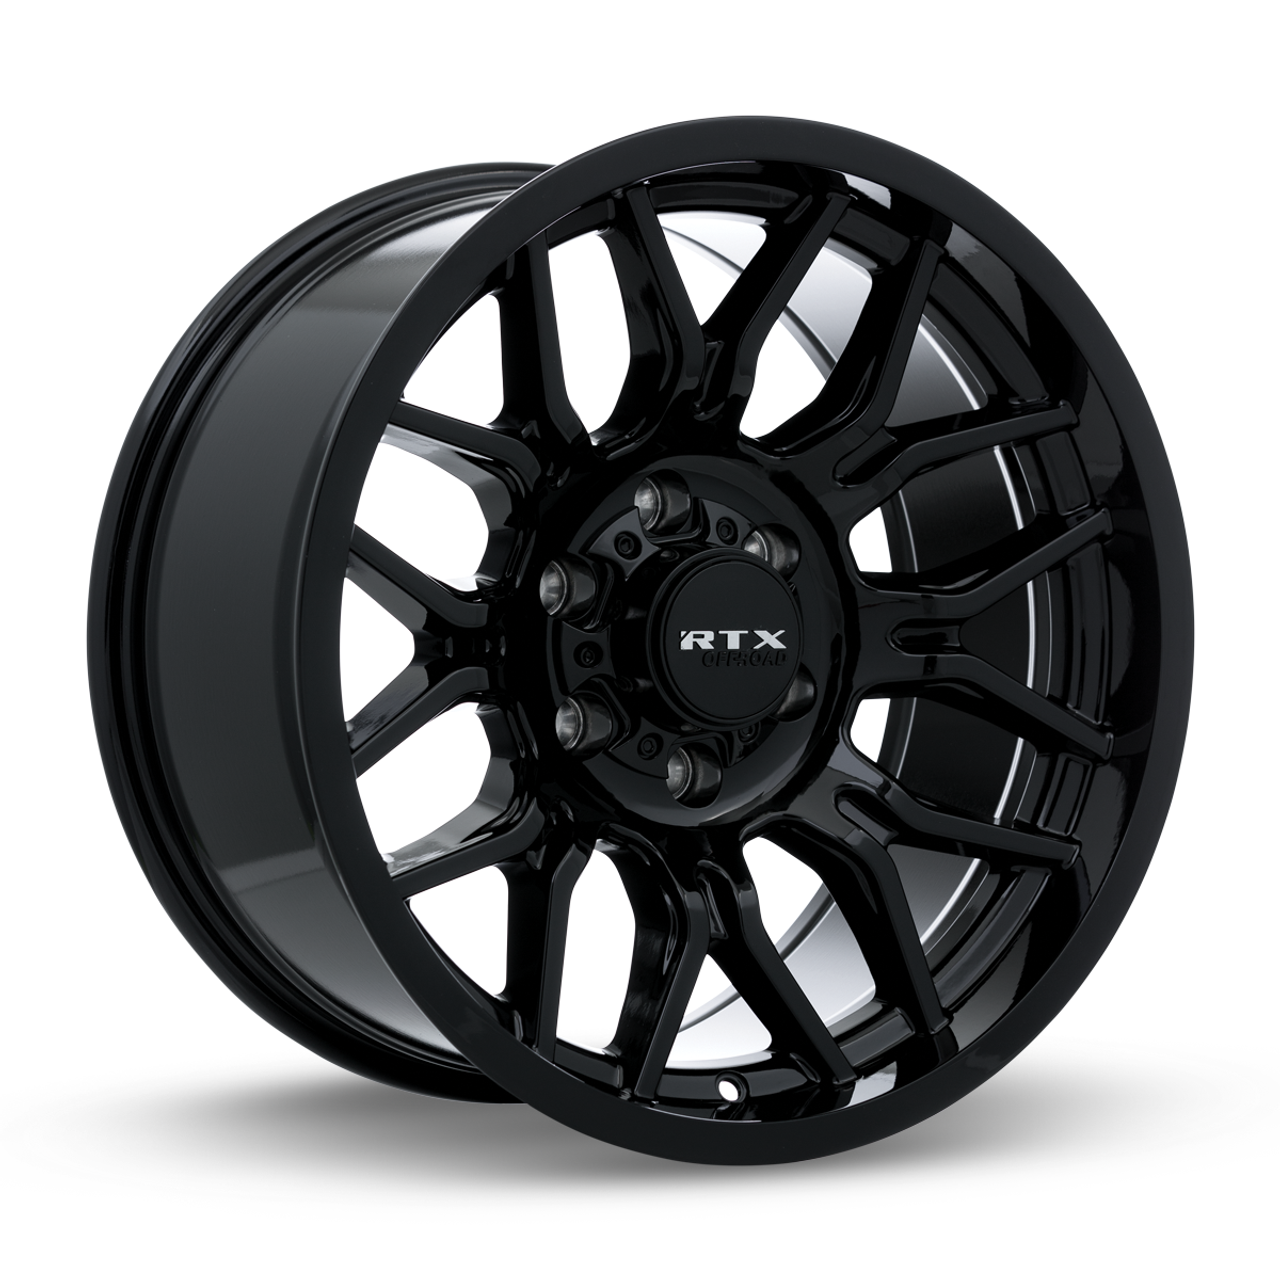 Set 4 20" RTX Claw Gloss Black Wheels 20x10 5x5 -18mm Lifted For Jeep Truck Rims